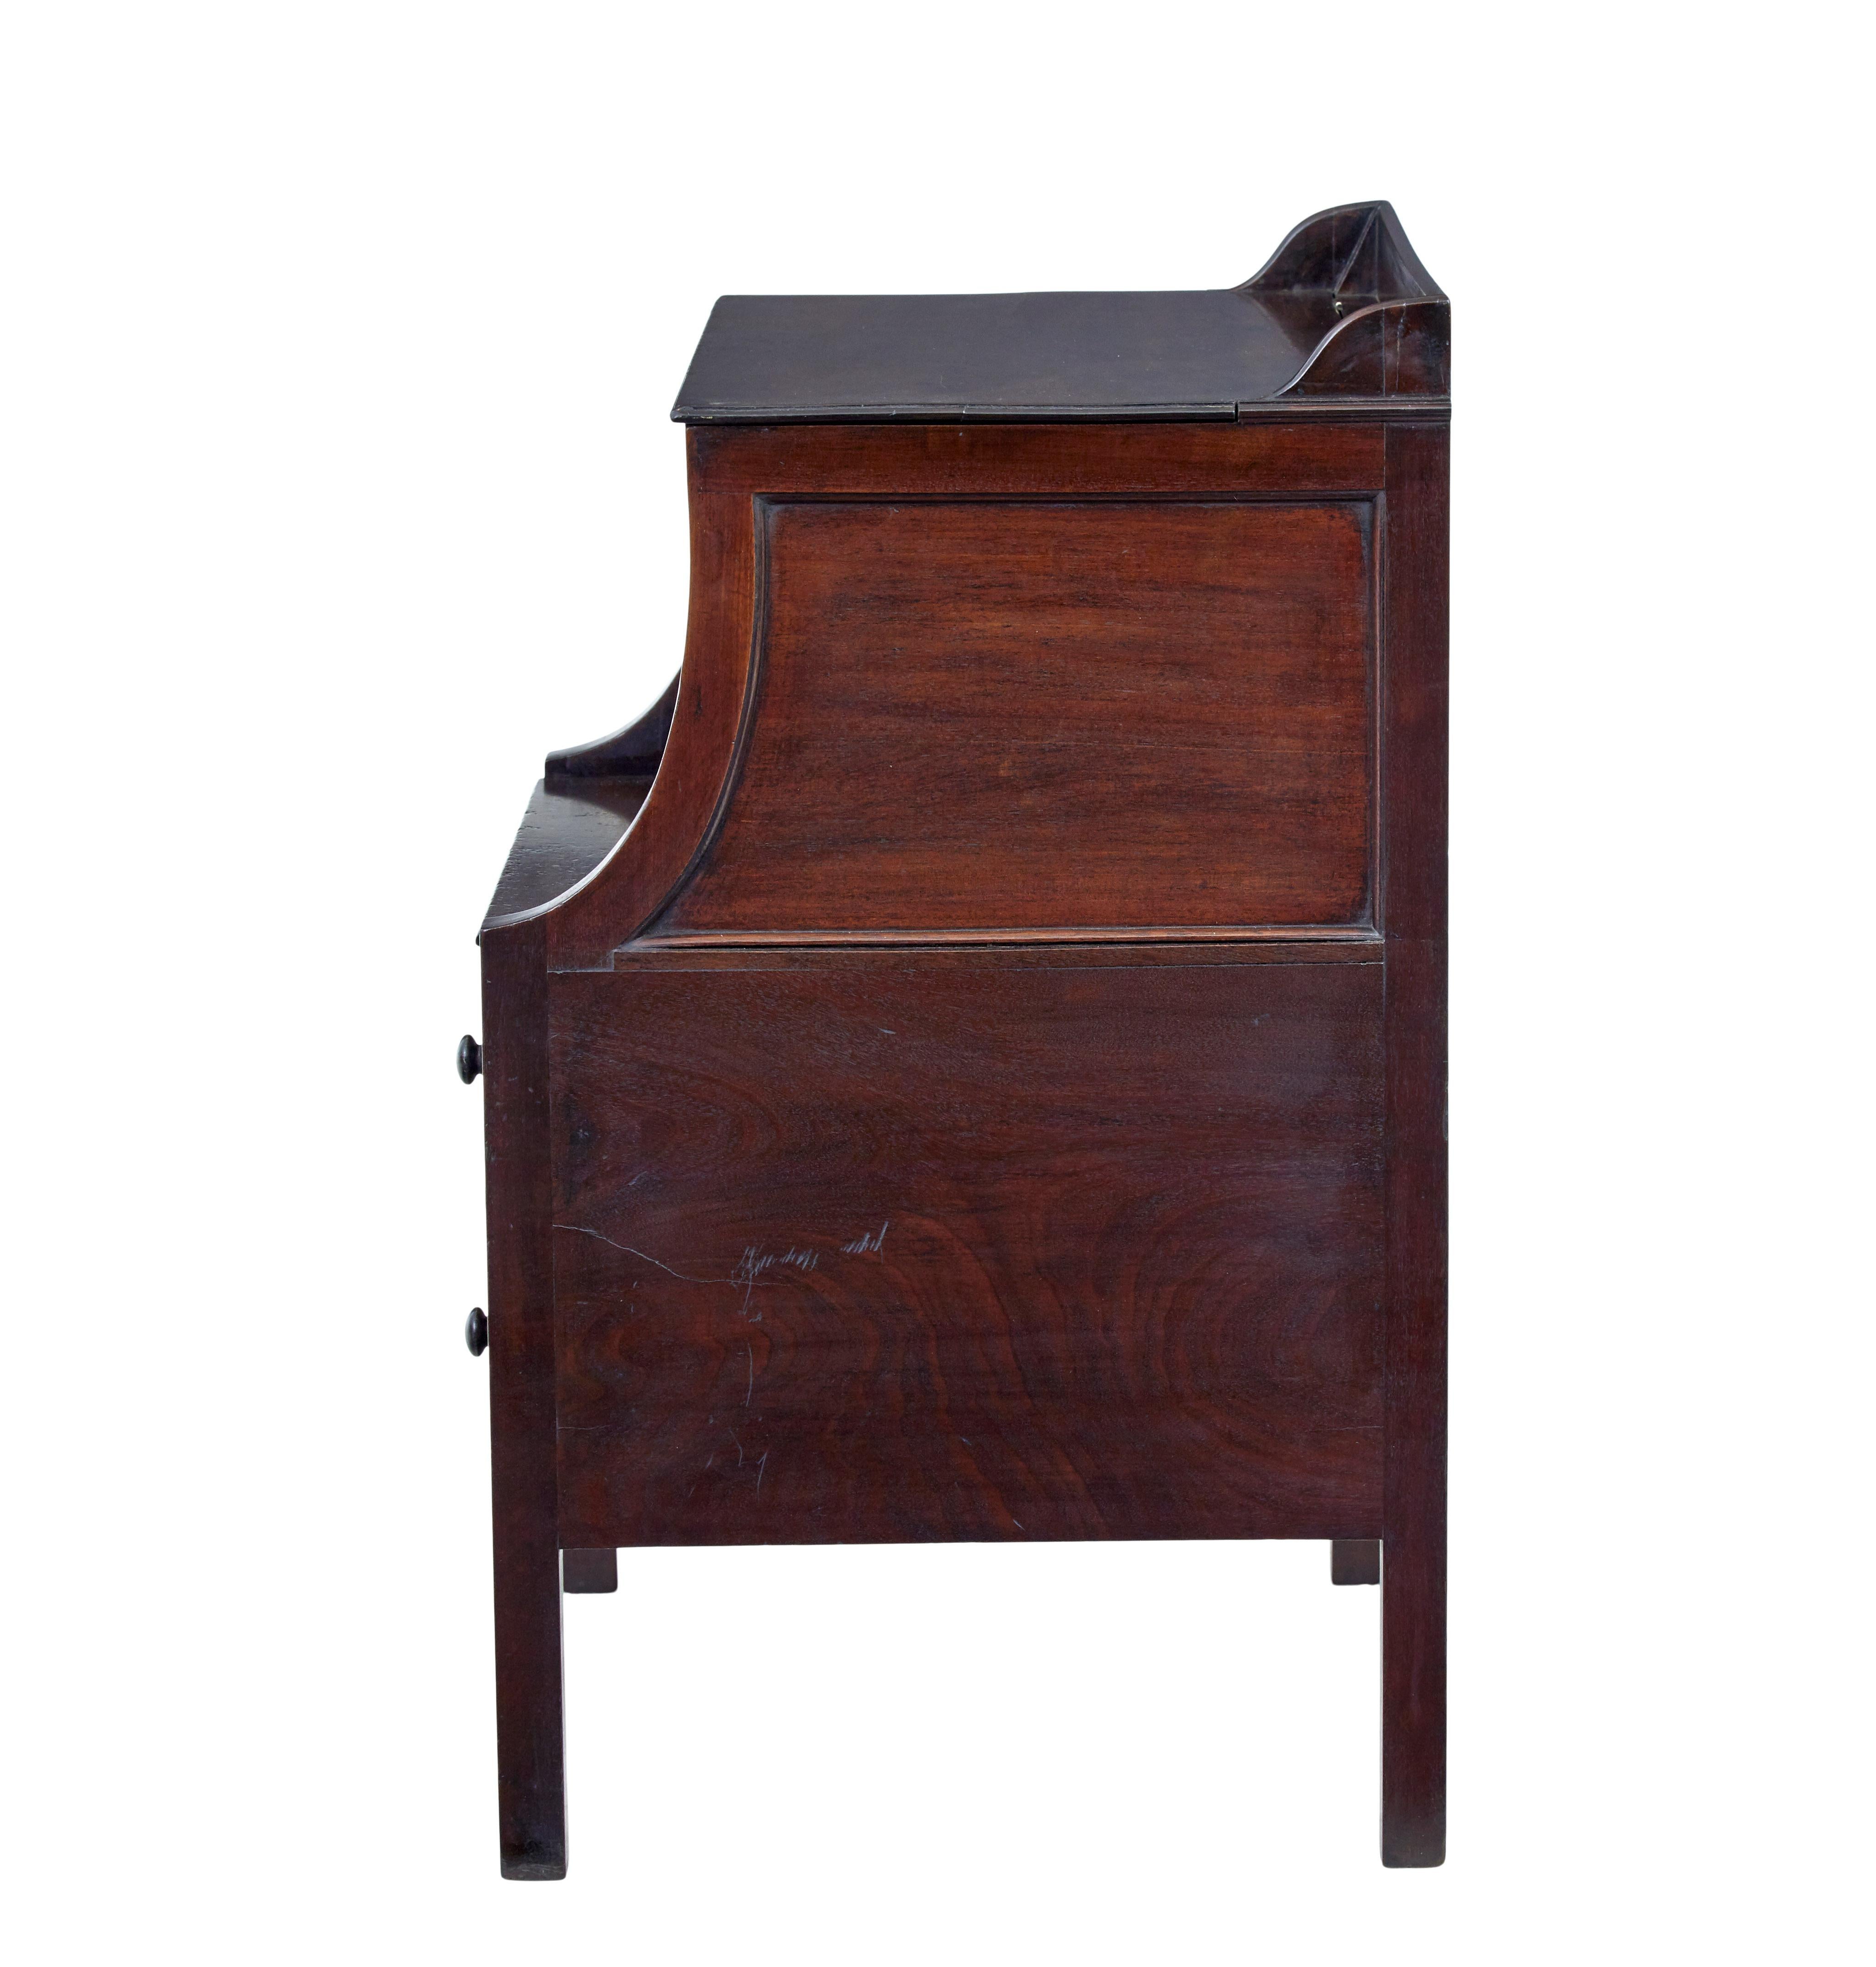 Hand-Crafted 18th century Georgian mahogany bedside commode